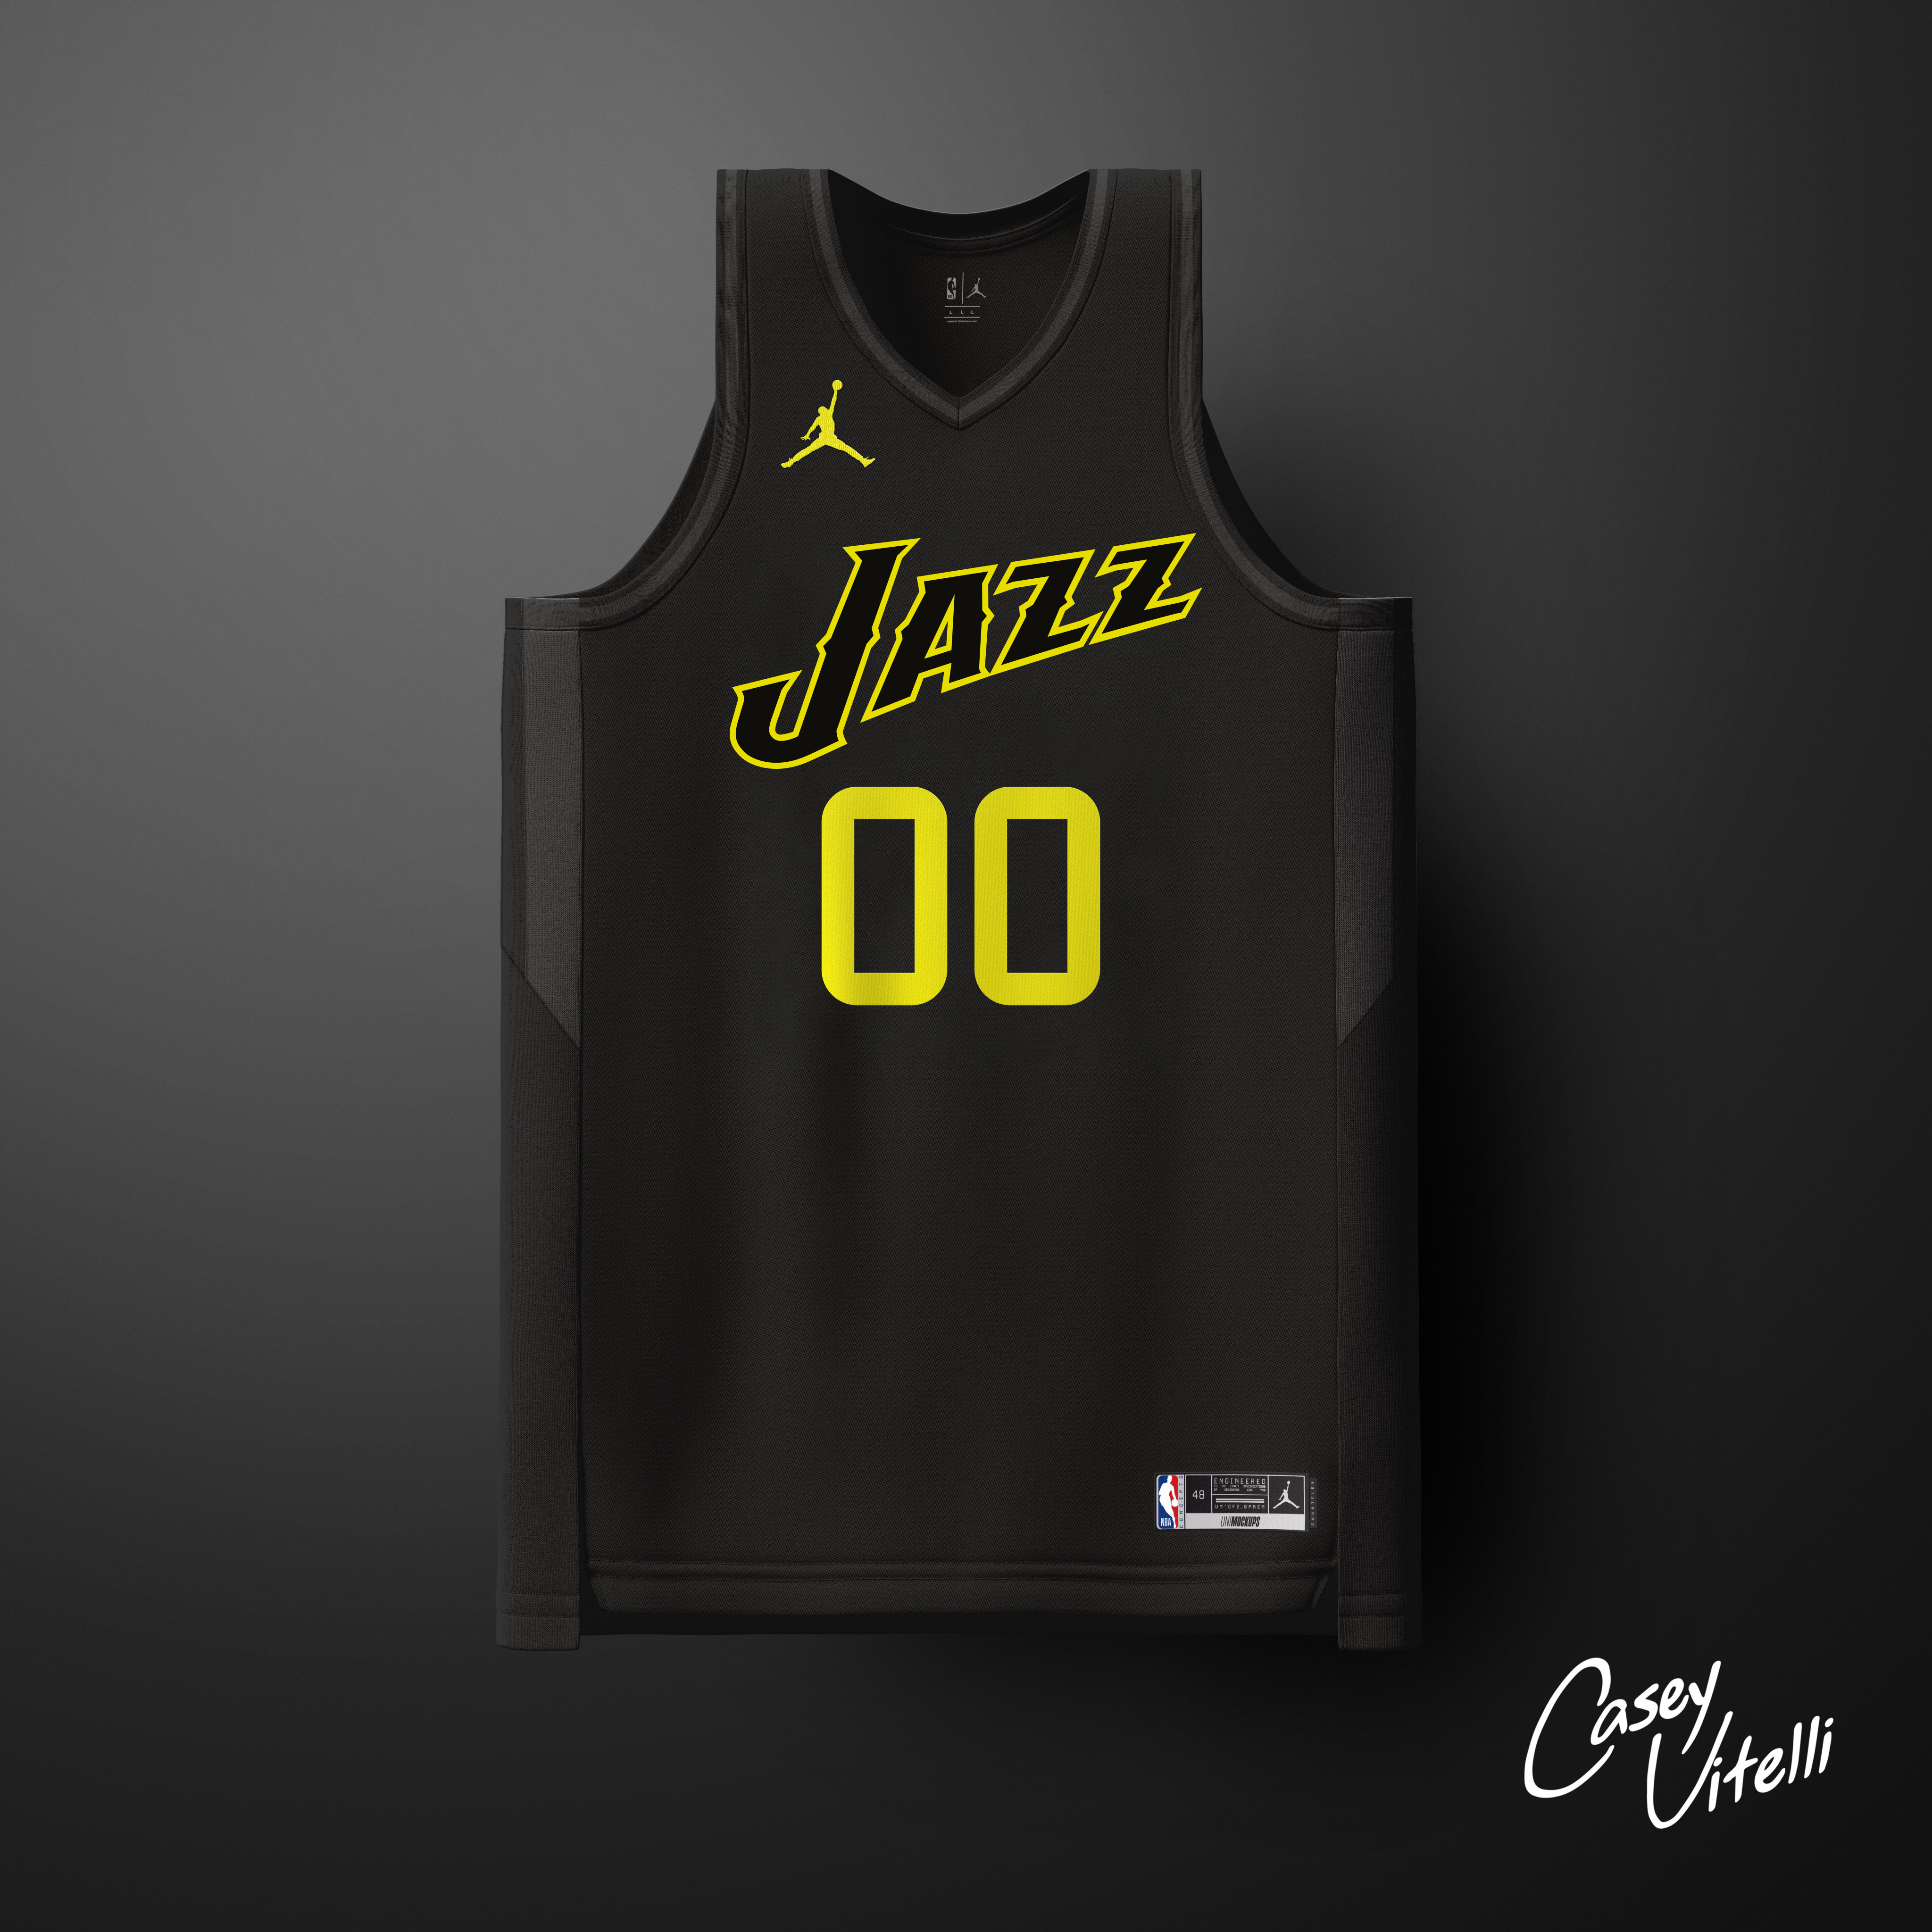 The newest UniMockups basketball jersey template just dropped